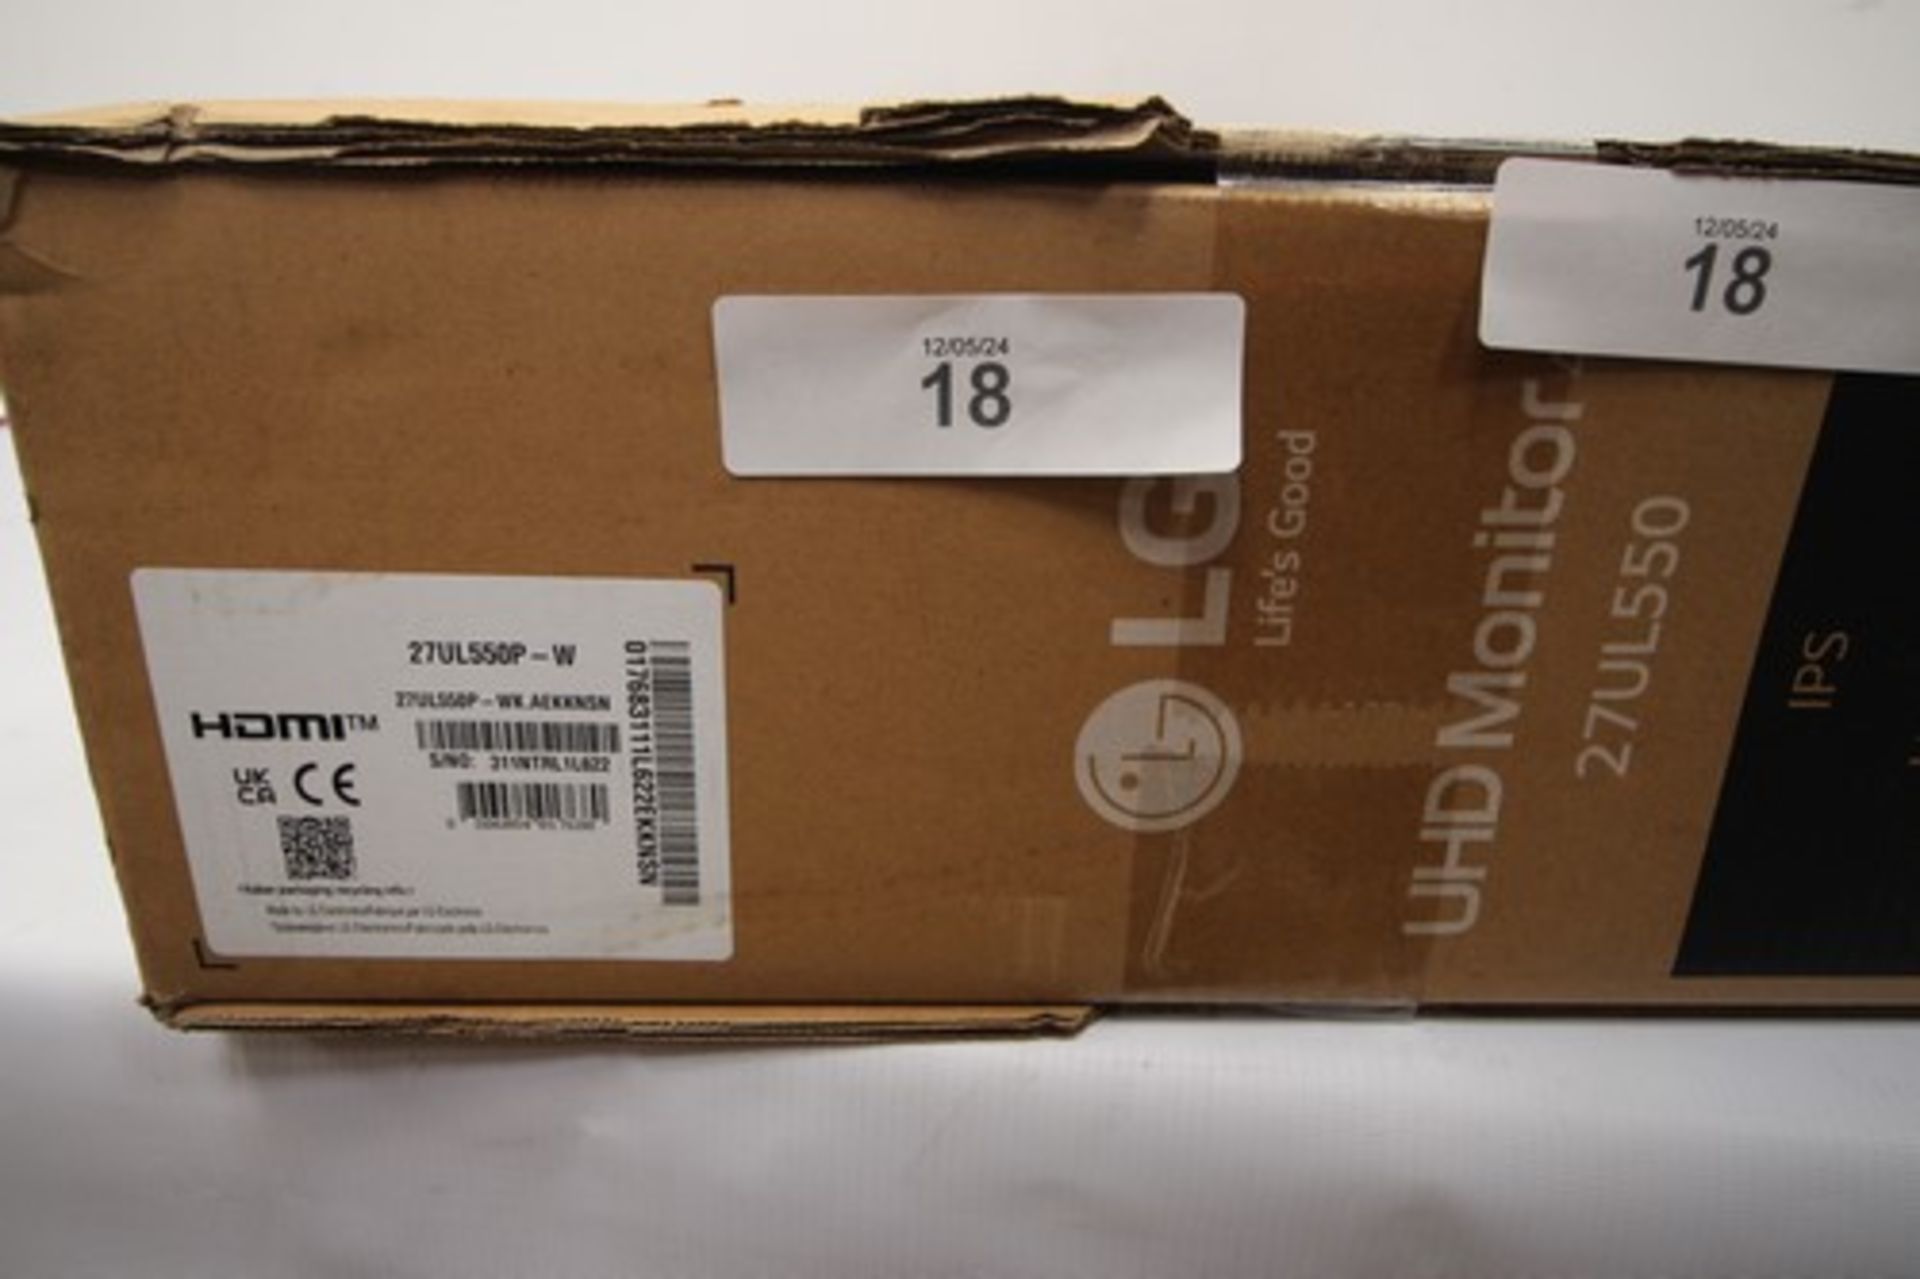 1 x LG UHD 27" monitor, model No: 27UL550P - sealed new in box (ES3 cage) - Image 2 of 2